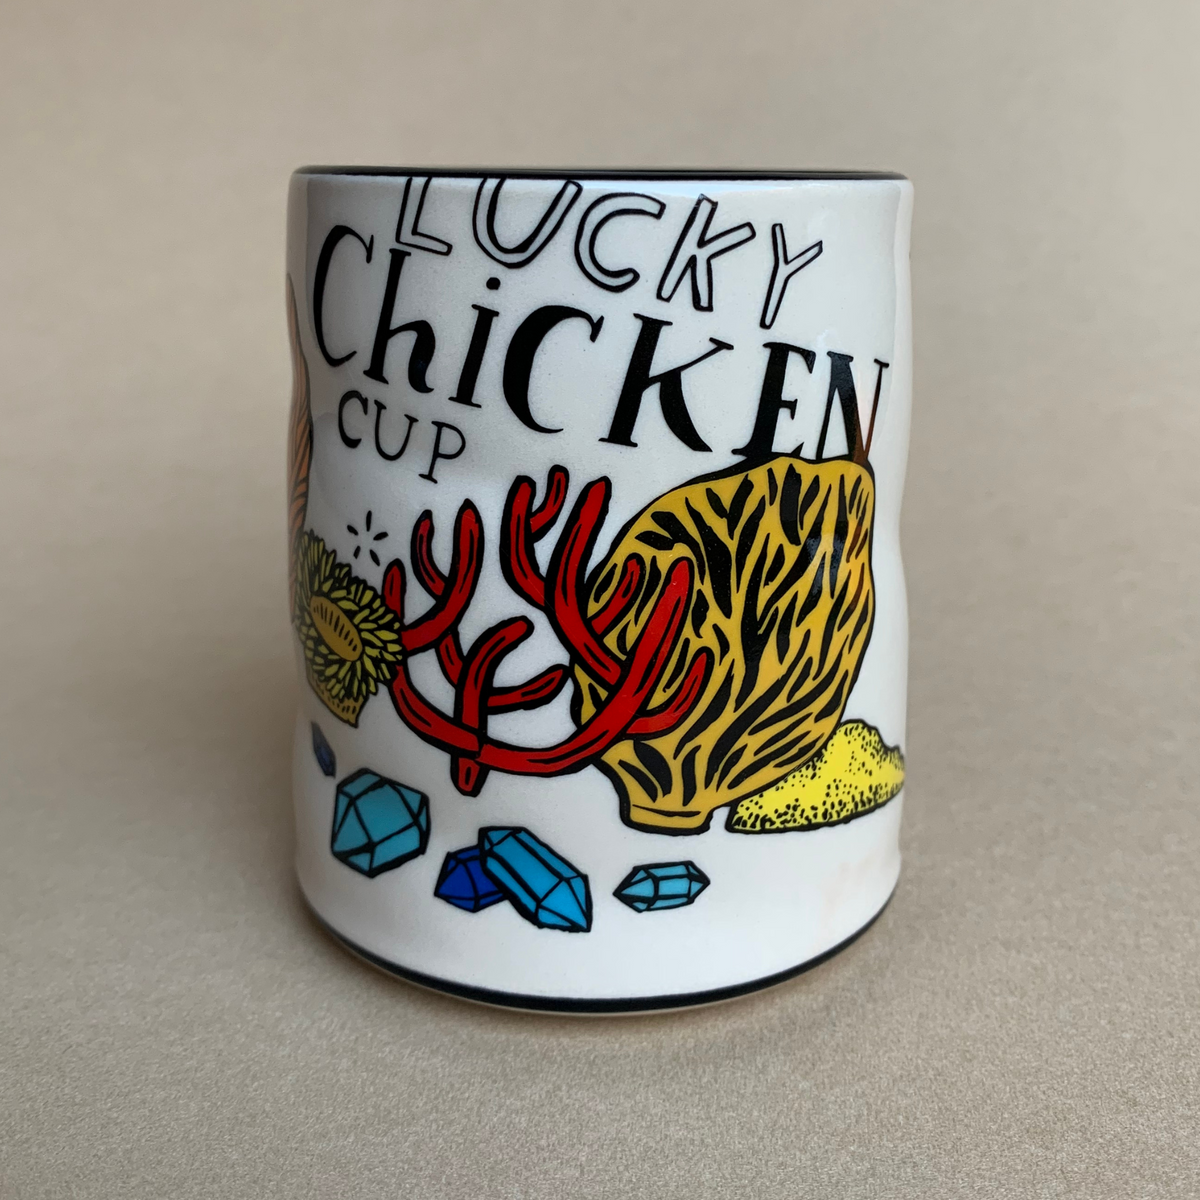 Lucky Chicken Snorkeling with Mermaid Cup - Large